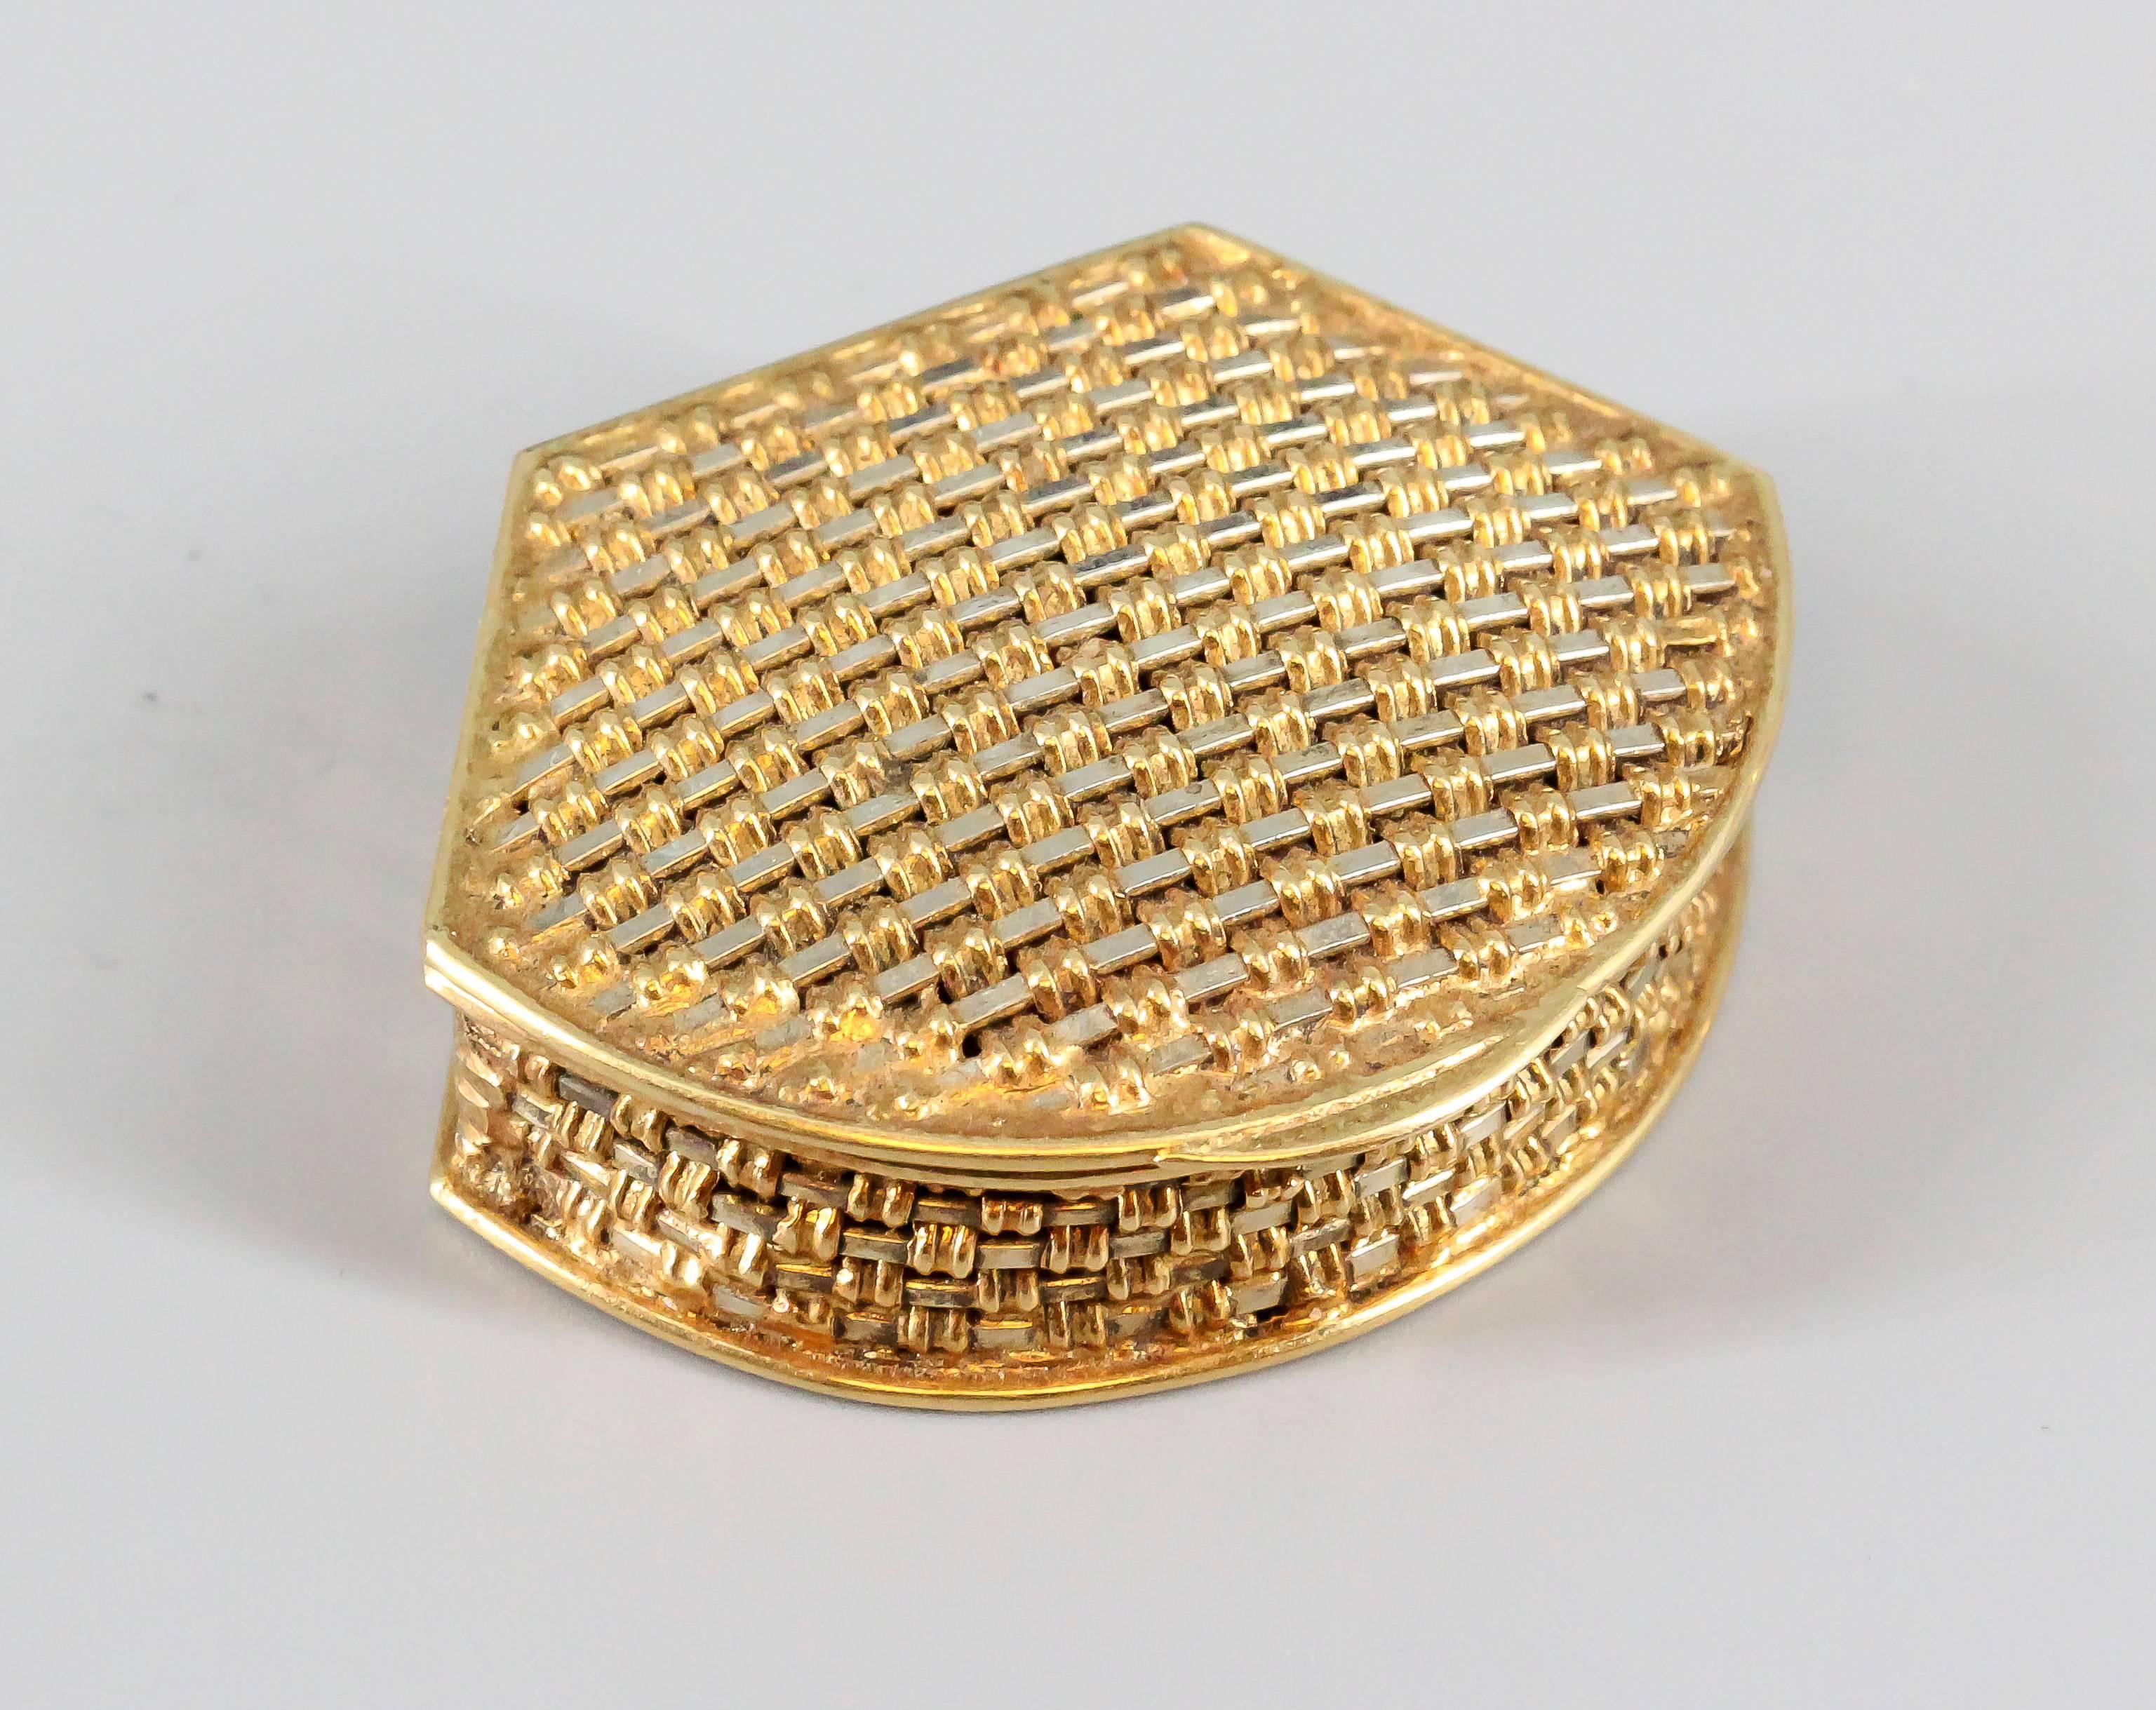 Elegant 18K white and yellow gold basket weave design pill box of Italian origin.
It features a clamshell like shape, with intricately weaved gold strands of white and yellow. 
